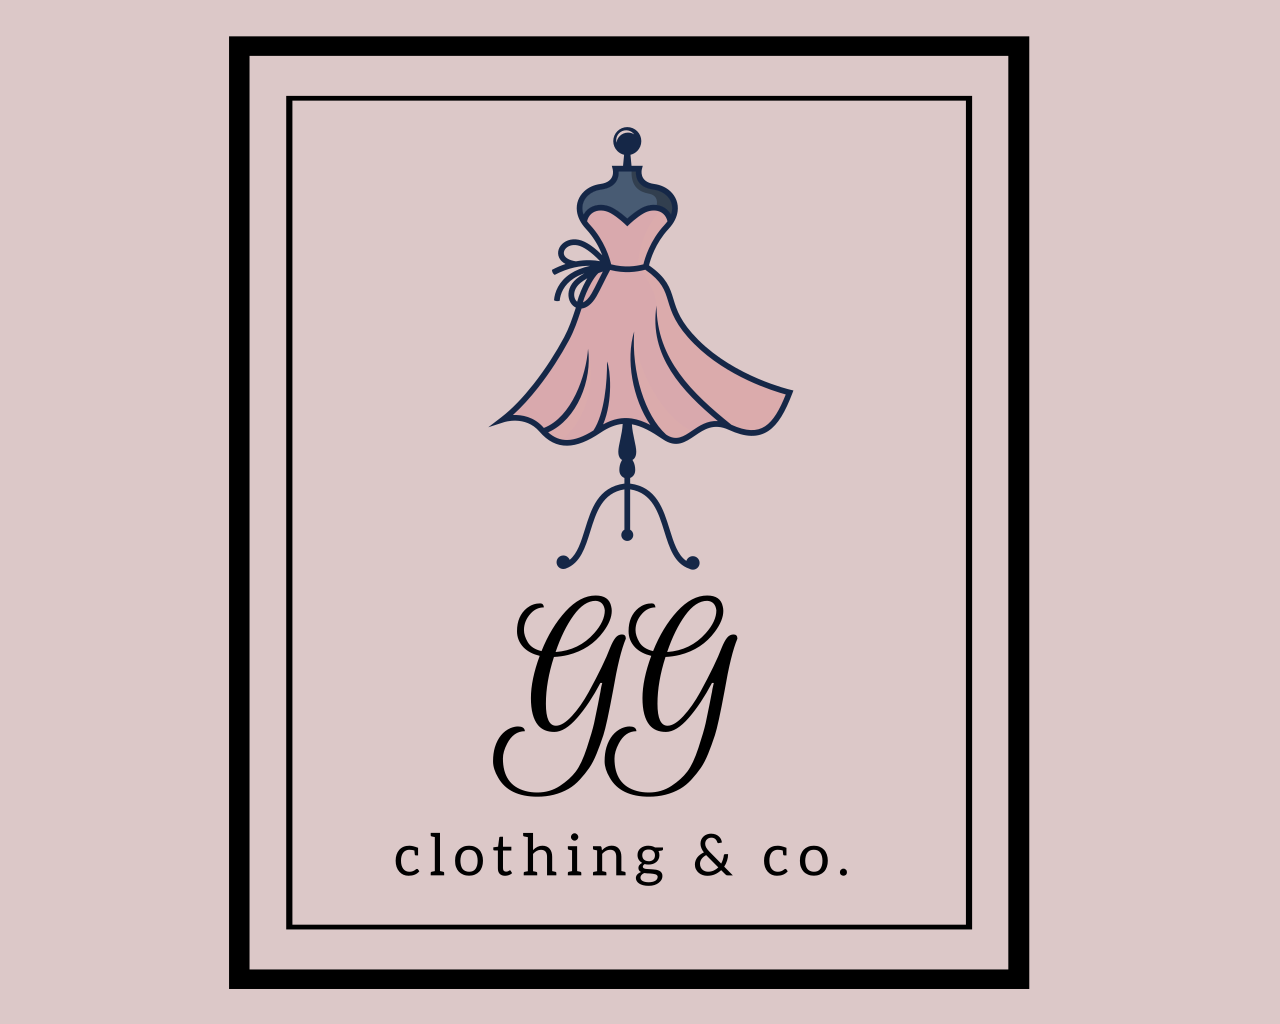 GG clothing & co.'s web page